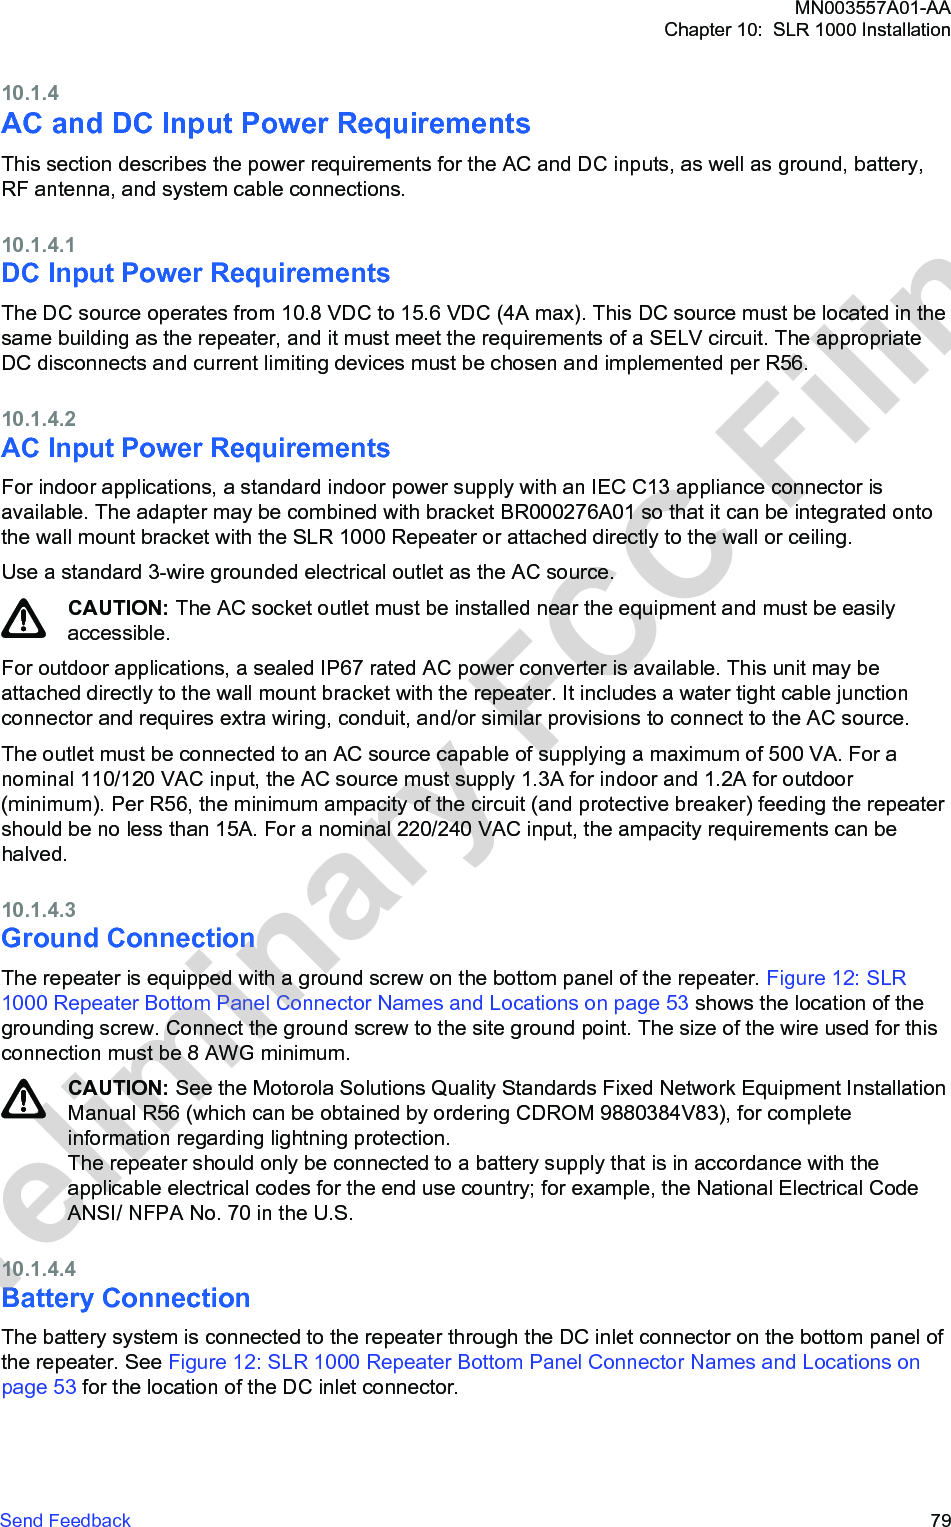 10.1.4AC and DC Input Power RequirementsThis section describes the power requirements for the AC and DC inputs, as well as ground, battery,RF antenna, and system cable connections.10.1.4.1DC Input Power RequirementsThe DC source operates from 10.8 VDC to 15.6 VDC (4A max). This DC source must be located in thesame building as the repeater, and it must meet the requirements of a SELV circuit. The appropriateDC disconnects and current limiting devices must be chosen and implemented per R56.10.1.4.2AC Input Power RequirementsFor indoor applications, a standard indoor power supply with an IEC C13 appliance connector isavailable. The adapter may be combined with bracket BR000276A01 so that it can be integrated ontothe wall mount bracket with the SLR 1000 Repeater or attached directly to the wall or ceiling.Use a standard 3-wire grounded electrical outlet as the AC source.CAUTION: The AC socket outlet must be installed near the equipment and must be easilyaccessible.For outdoor applications, a sealed IP67 rated AC power converter is available. This unit may beattached directly to the wall mount bracket with the repeater. It includes a water tight cable junctionconnector and requires extra wiring, conduit, and/or similar provisions to connect to the AC source.The outlet must be connected to an AC source capable of supplying a maximum of 500 VA. For anominal 110/120 VAC input, the AC source must supply 1.3A for indoor and 1.2A for outdoor(minimum). Per R56, the minimum ampacity of the circuit (and protective breaker) feeding the repeatershould be no less than 15A. For a nominal 220/240 VAC input, the ampacity requirements can behalved.10.1.4.3Ground ConnectionThe repeater is equipped with a ground screw on the bottom panel of the repeater. Figure 12: SLR1000 Repeater Bottom Panel Connector Names and Locations on page 53 shows the location of thegrounding screw. Connect the ground screw to the site ground point. The size of the wire used for thisconnection must be 8 AWG minimum.CAUTION: See the Motorola Solutions Quality Standards Fixed Network Equipment InstallationManual R56 (which can be obtained by ordering CDROM 9880384V83), for completeinformation regarding lightning protection.The repeater should only be connected to a battery supply that is in accordance with theapplicable electrical codes for the end use country; for example, the National Electrical CodeANSI/ NFPA No. 70 in the U.S.10.1.4.4Battery ConnectionThe battery system is connected to the repeater through the DC inlet connector on the bottom panel ofthe repeater. See Figure 12: SLR 1000 Repeater Bottom Panel Connector Names and Locations onpage 53 for the location of the DC inlet connector.MN003557A01-AAChapter 10:  SLR 1000 InstallationSend Feedback   79Preliminary FCC Filing